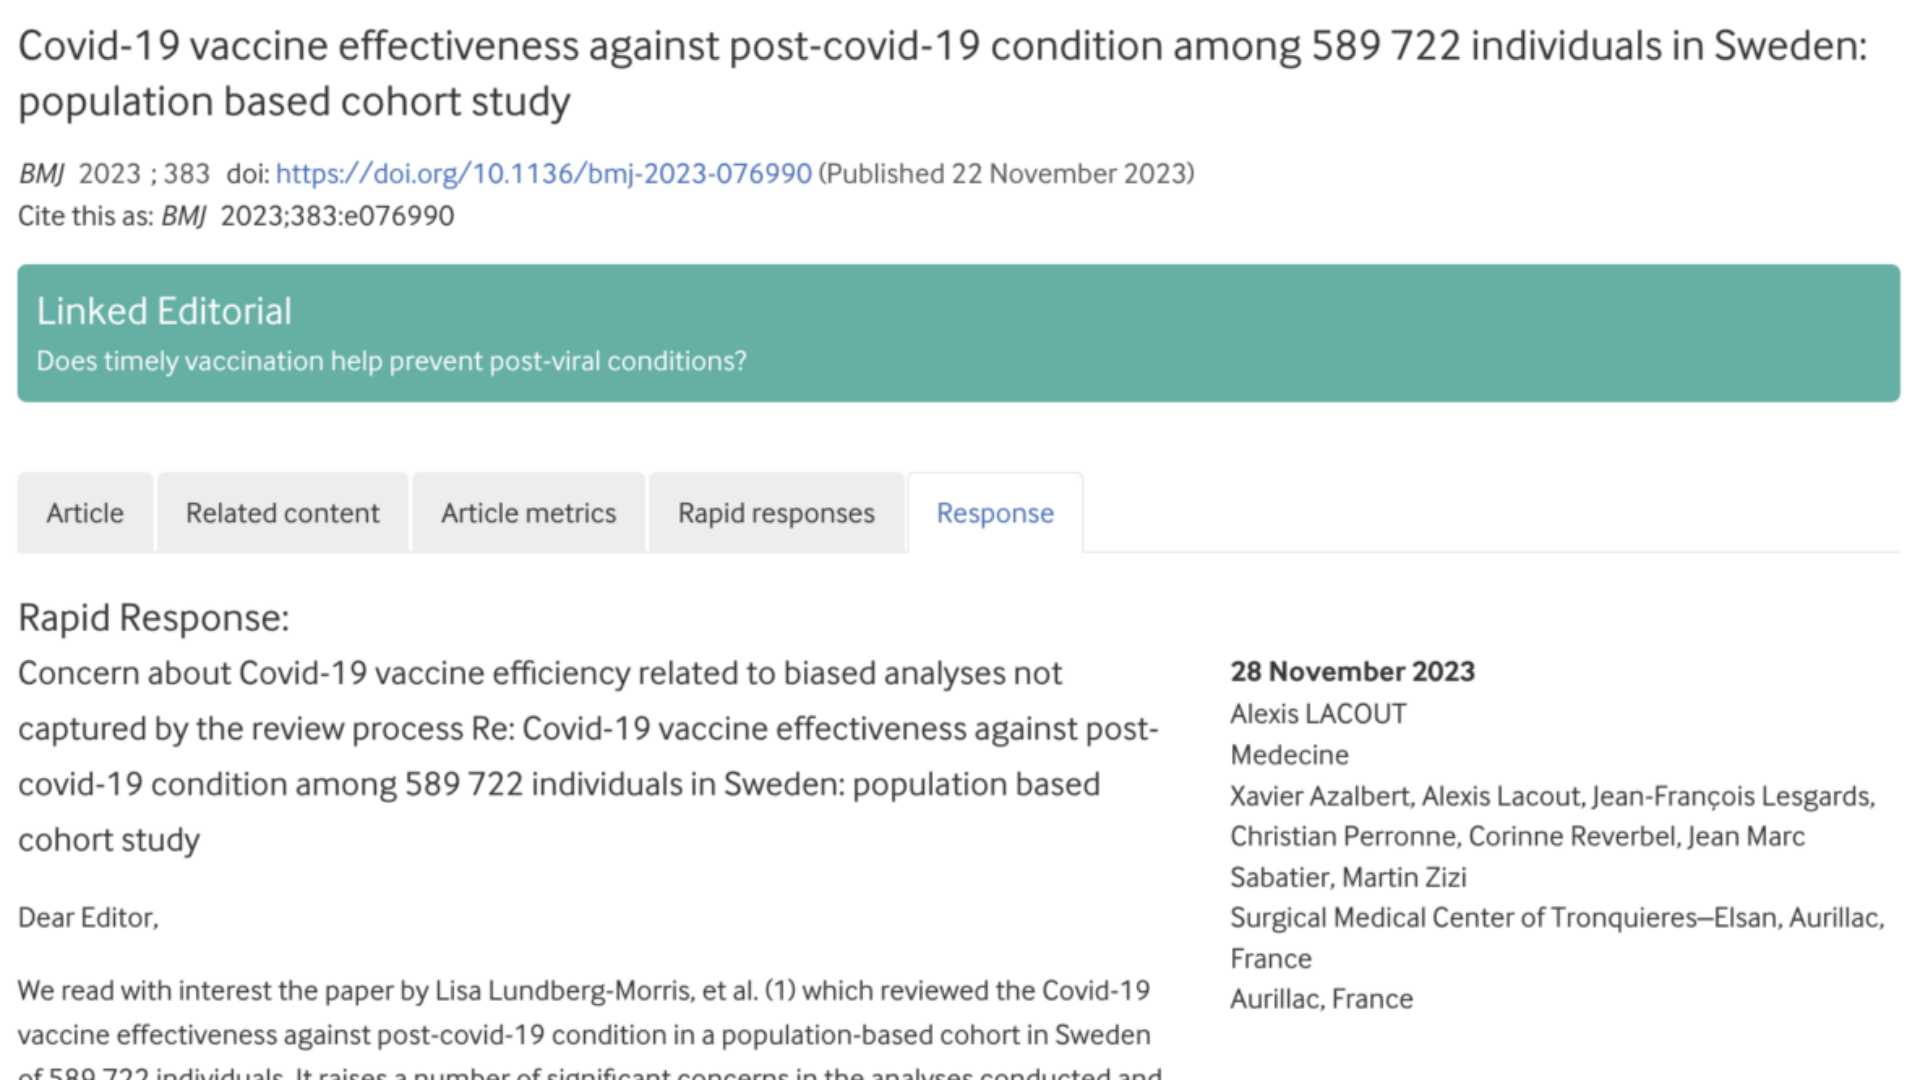 Concern about Covid-19 vaccine efficiency related to biased analyses